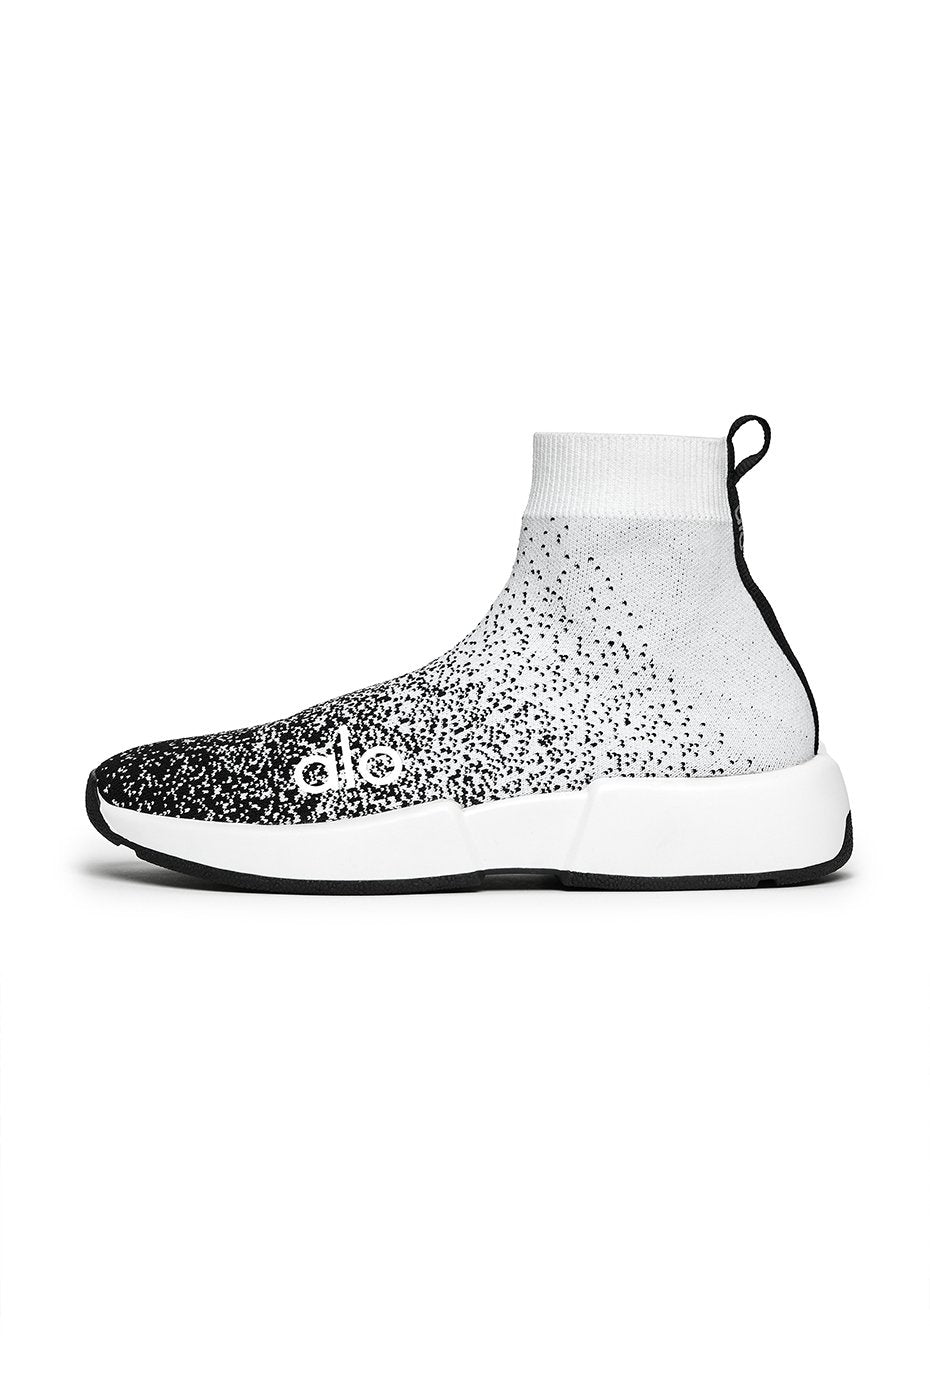 Alo Yoga Velocity Knit Sneakers Black Size 6 - $95 (52% Off Retail) - From  Jazmin